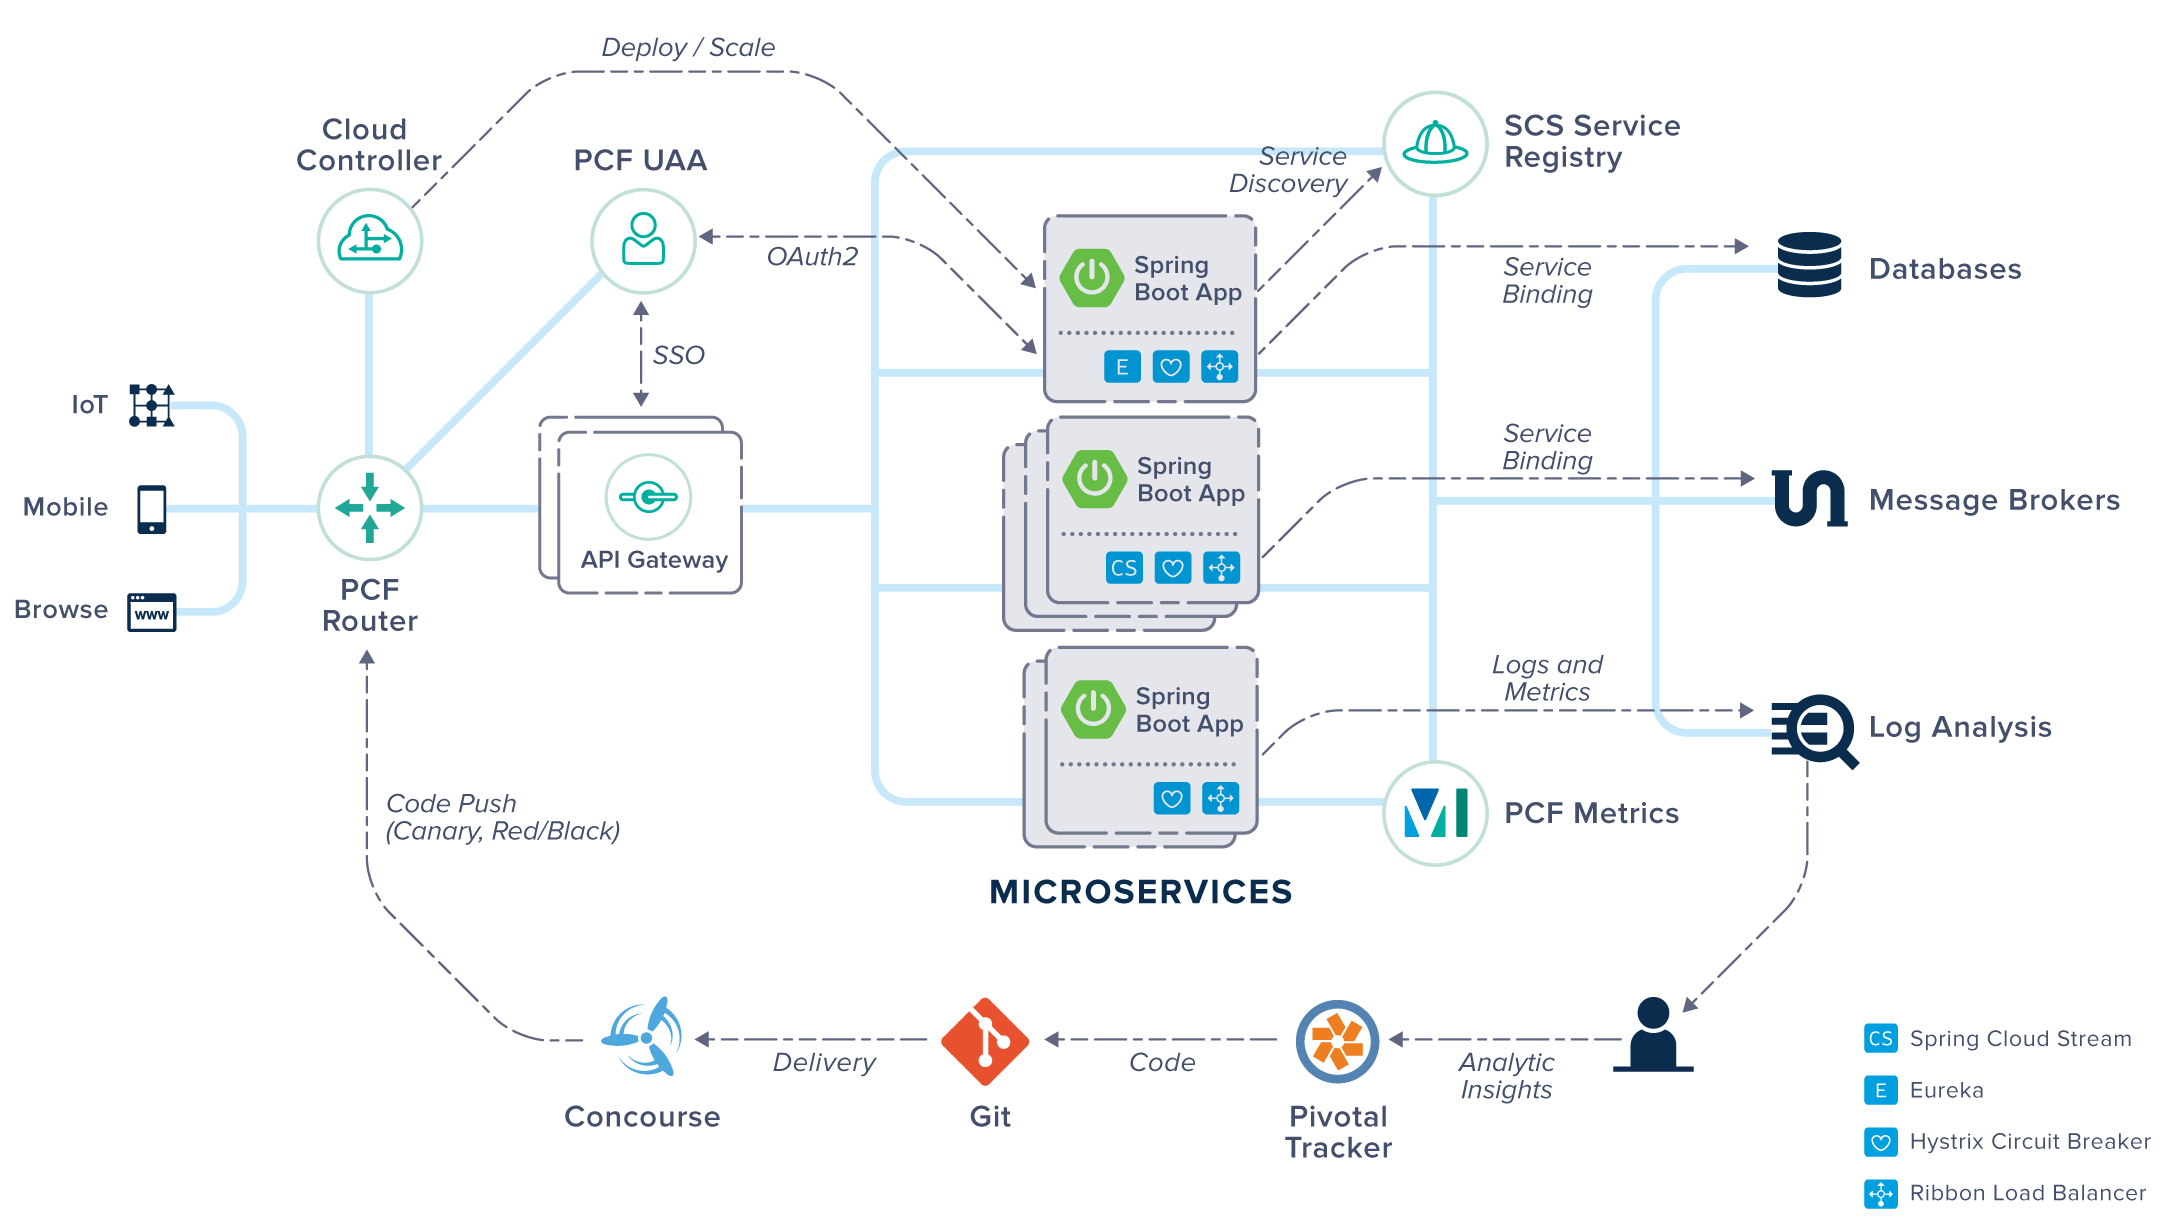 Creating Microservices on the Pivotal 